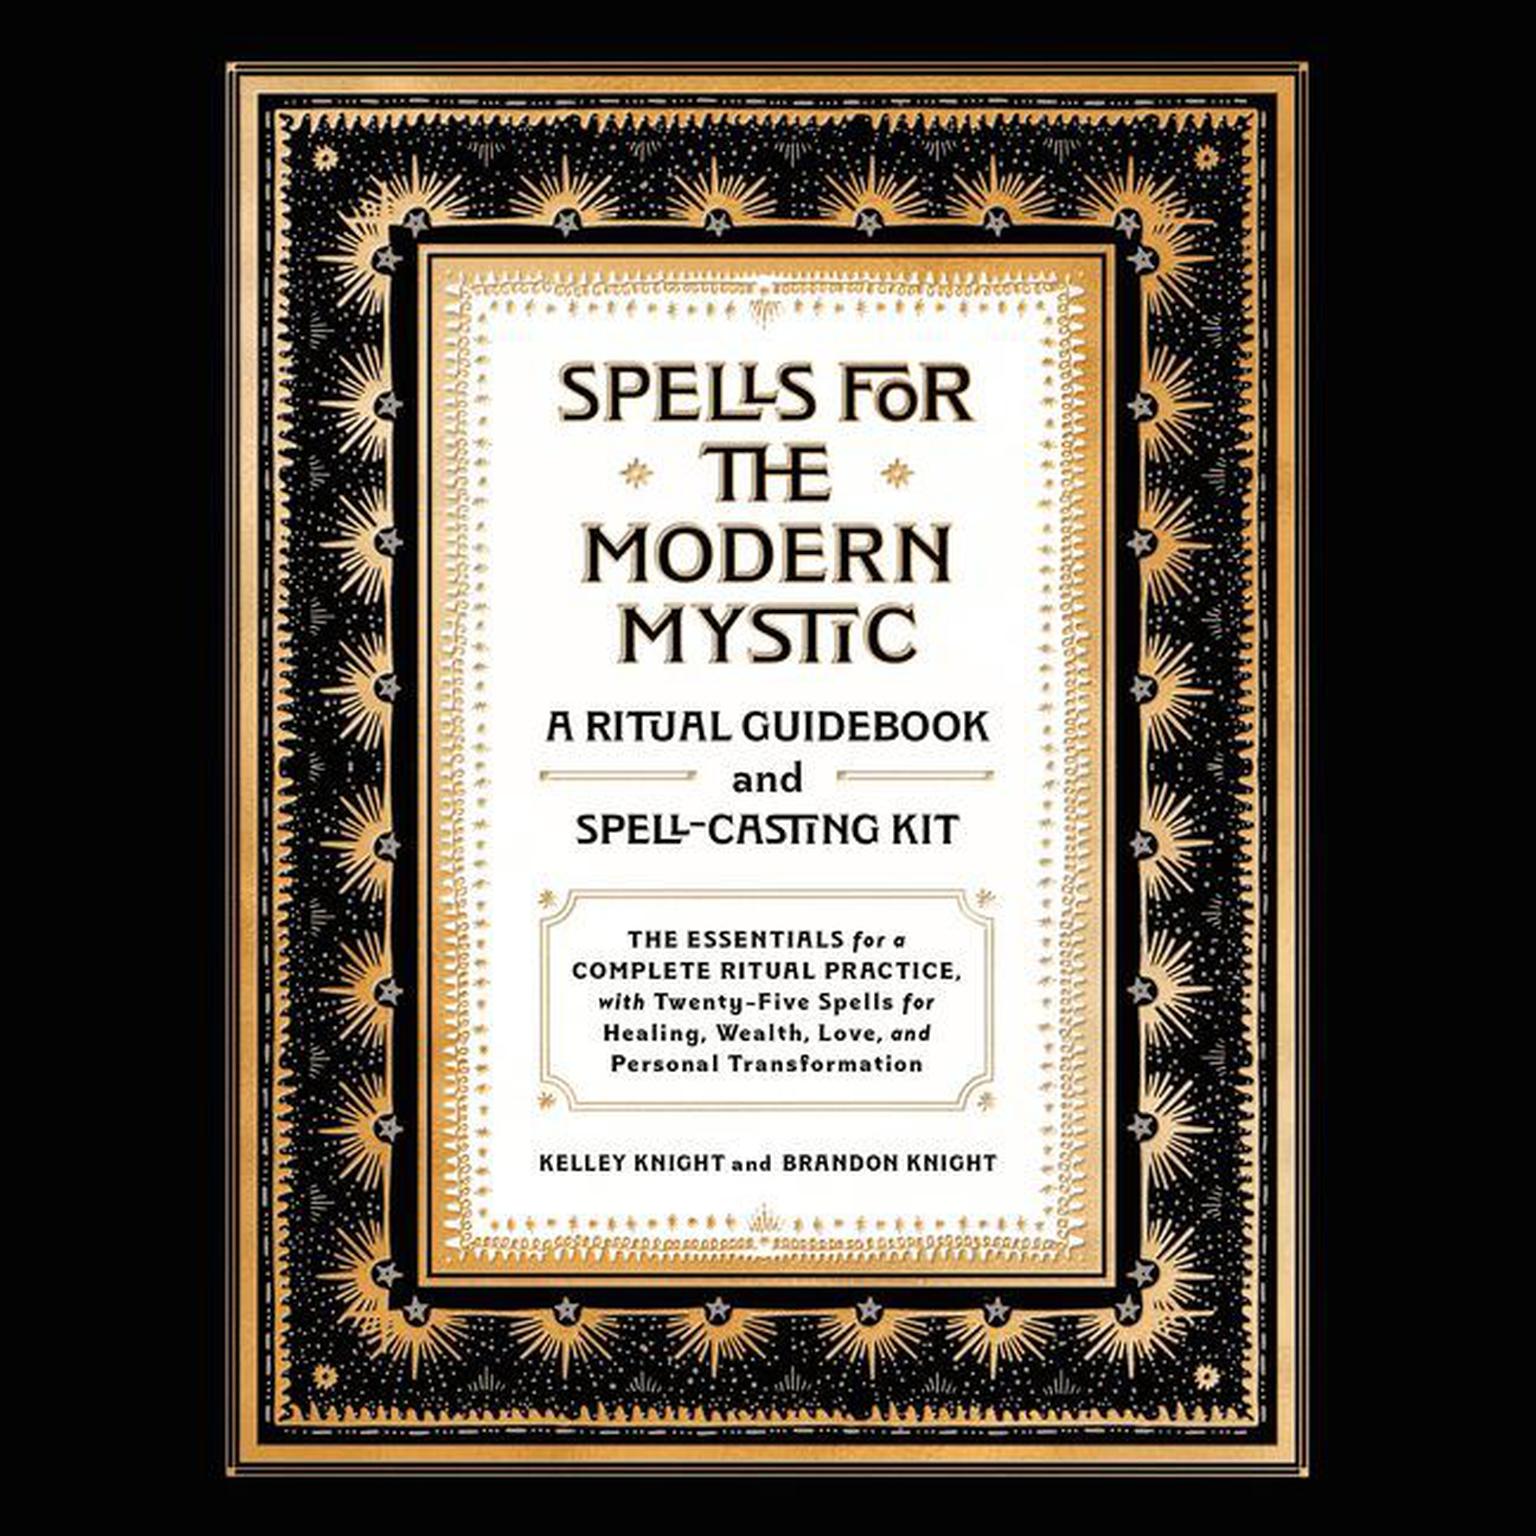 Spells for the Modern Mystic: A Ritual Guidebook and Spell-Casting Kit Audiobook, by Kelley Knight